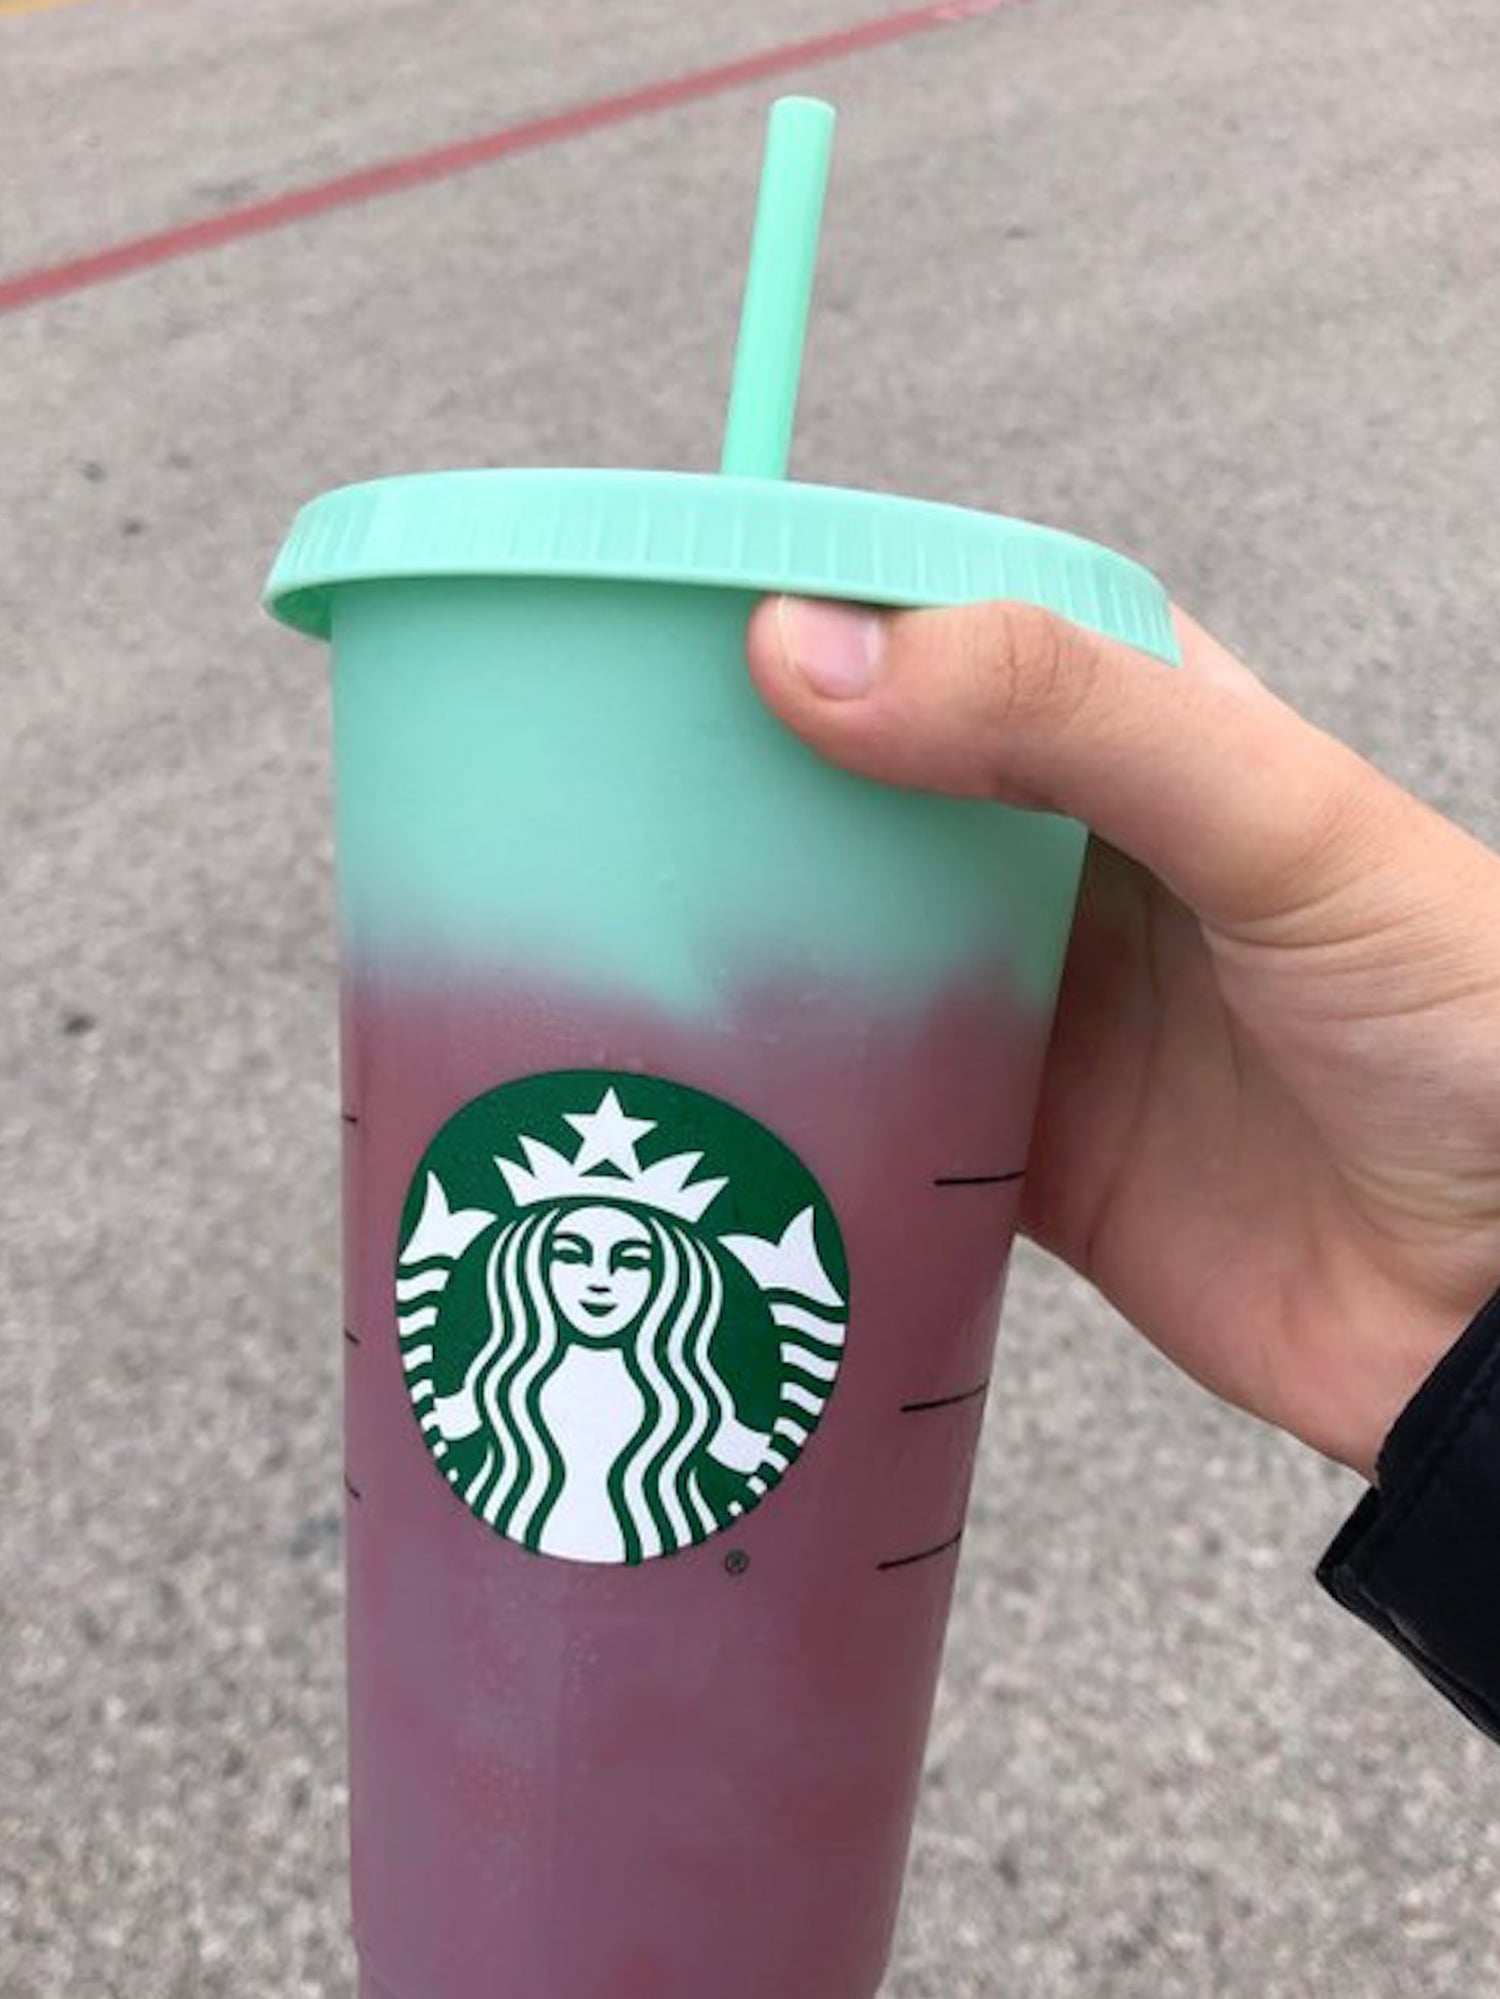 Starbucks Launched A New Set Of Color-Changing Reusable Cups